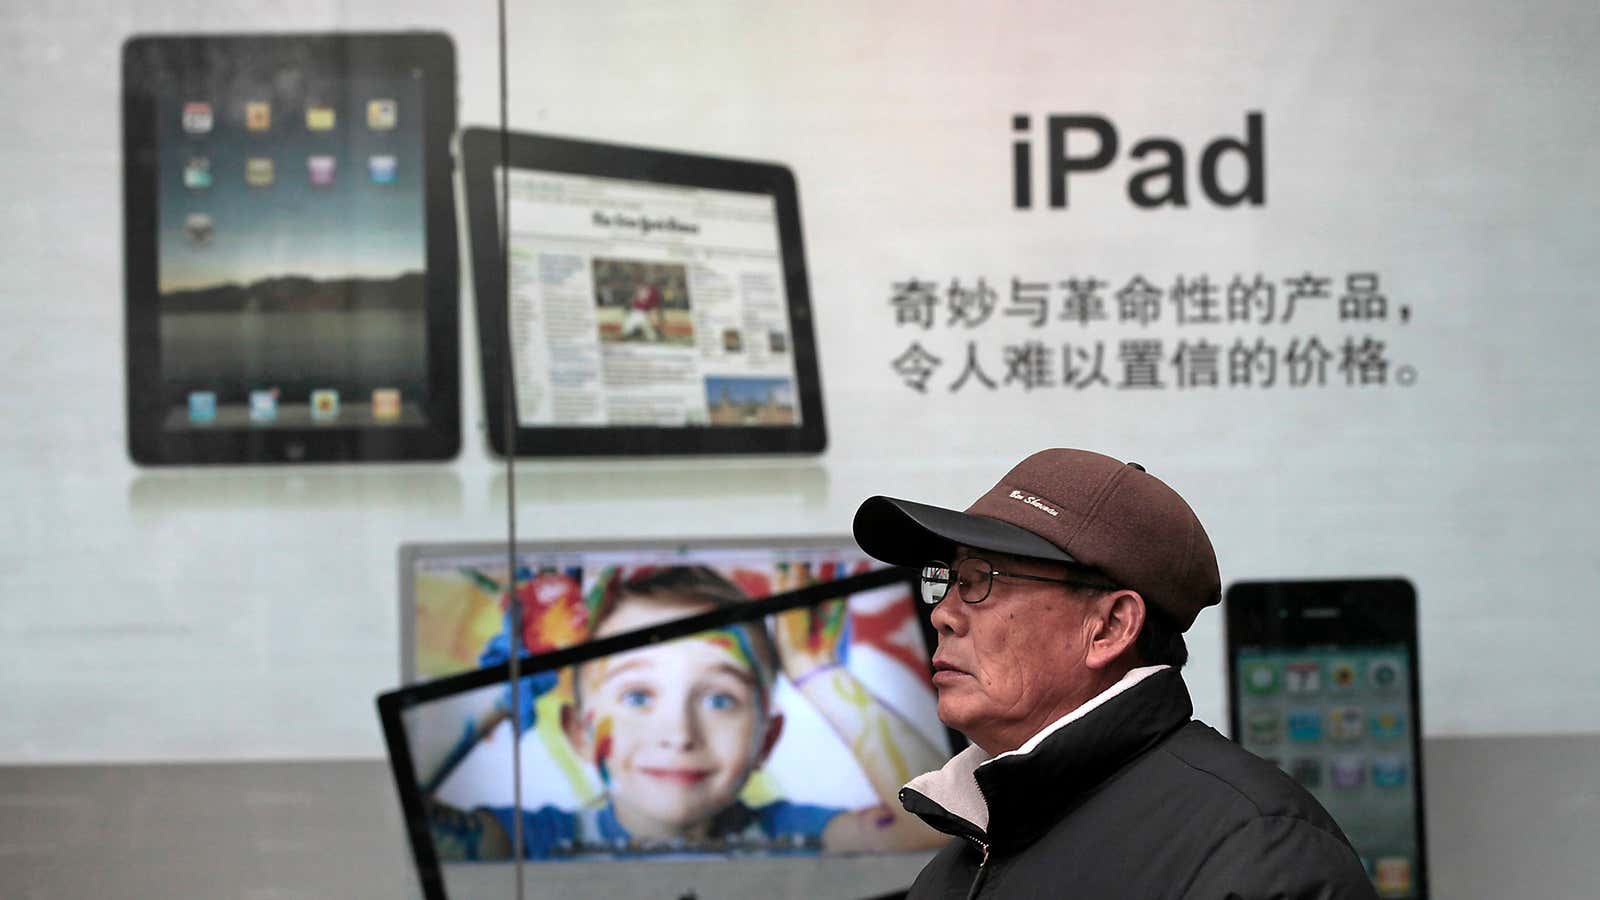 Apple will hold onto its market share, but China will be flush with home-grown tablets